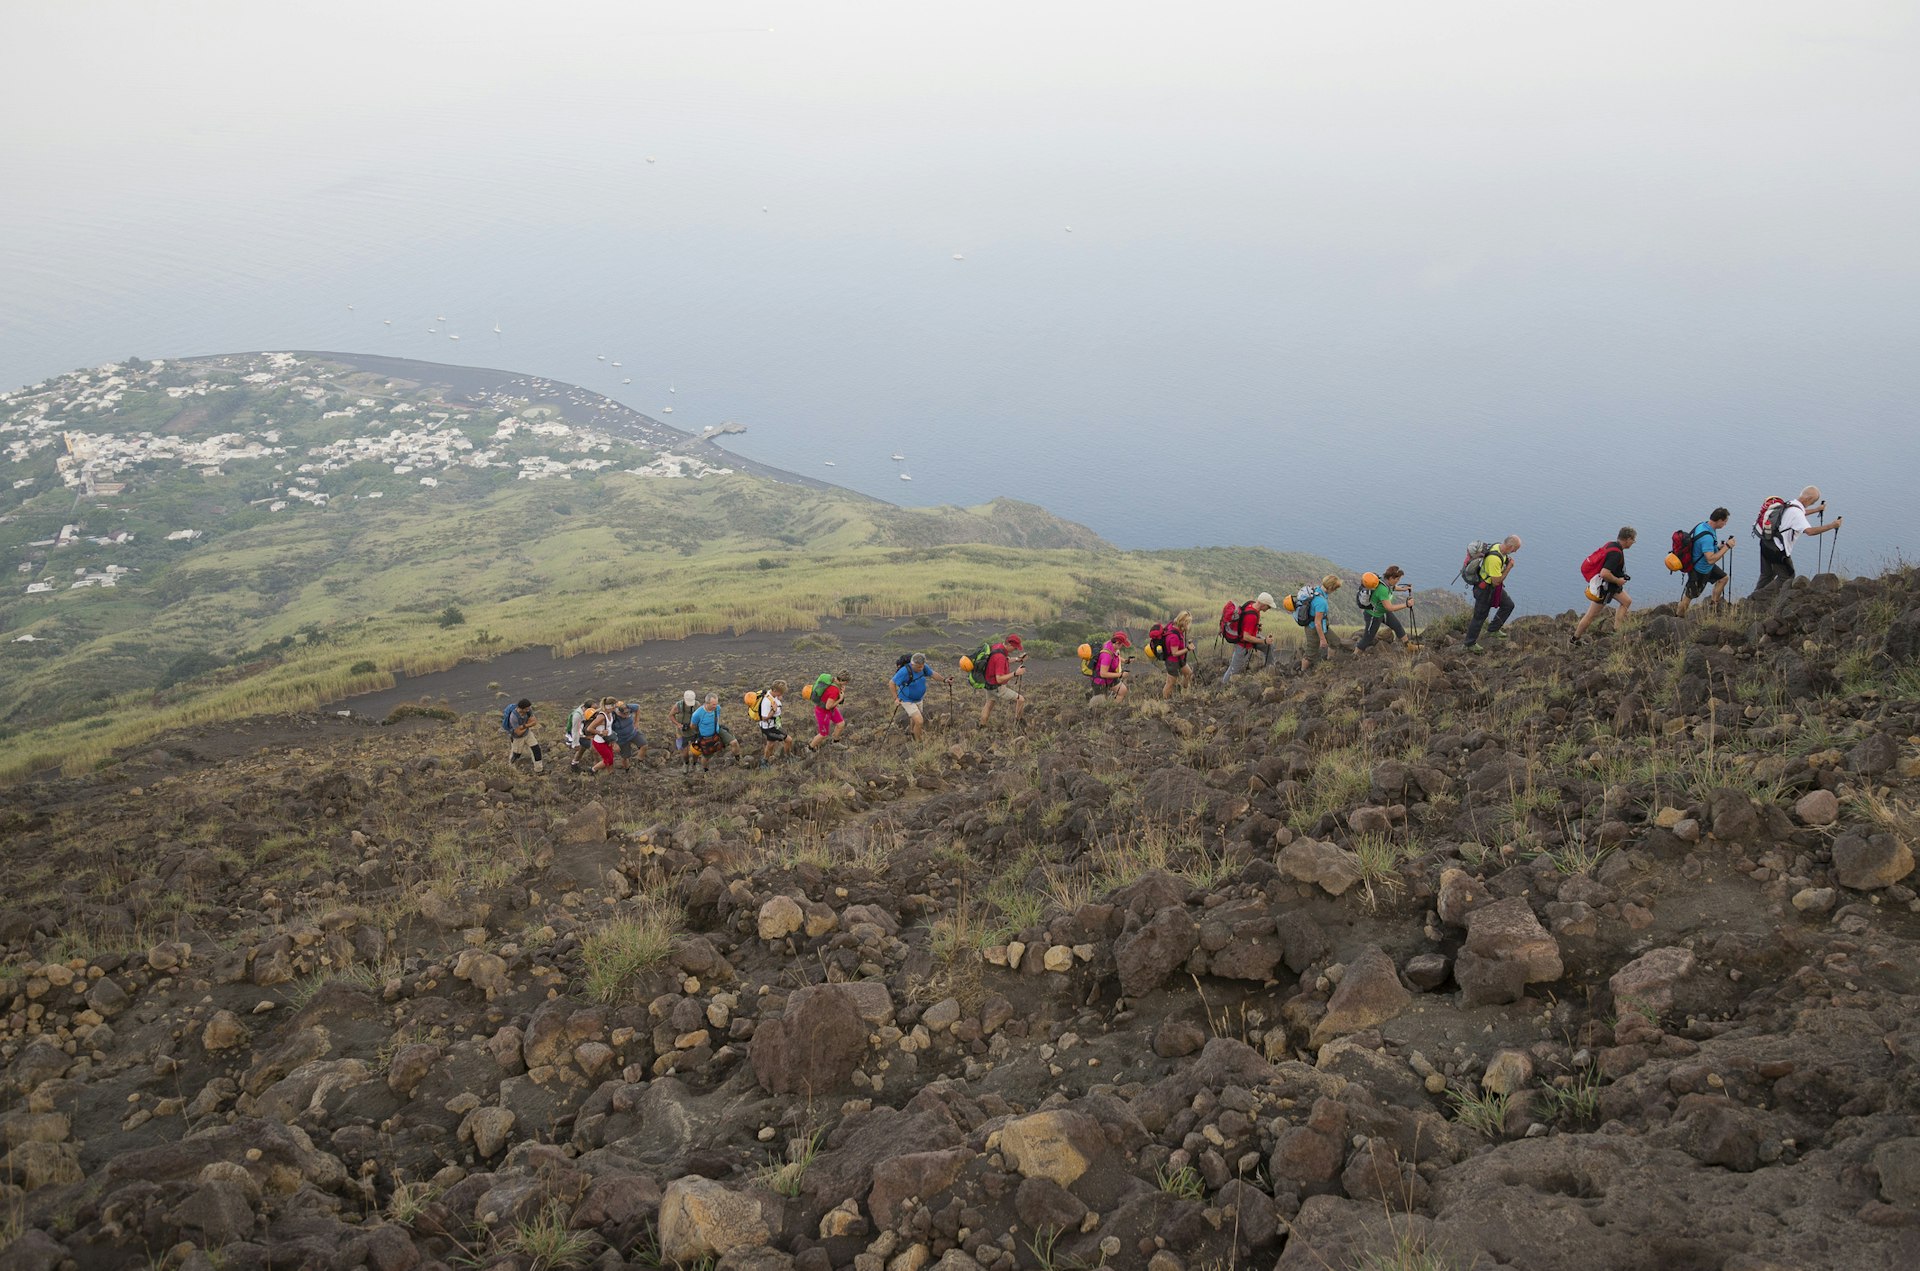 Several hikers in a line following a path up the side of a steep volcano. The town and coastline are in the distance below them